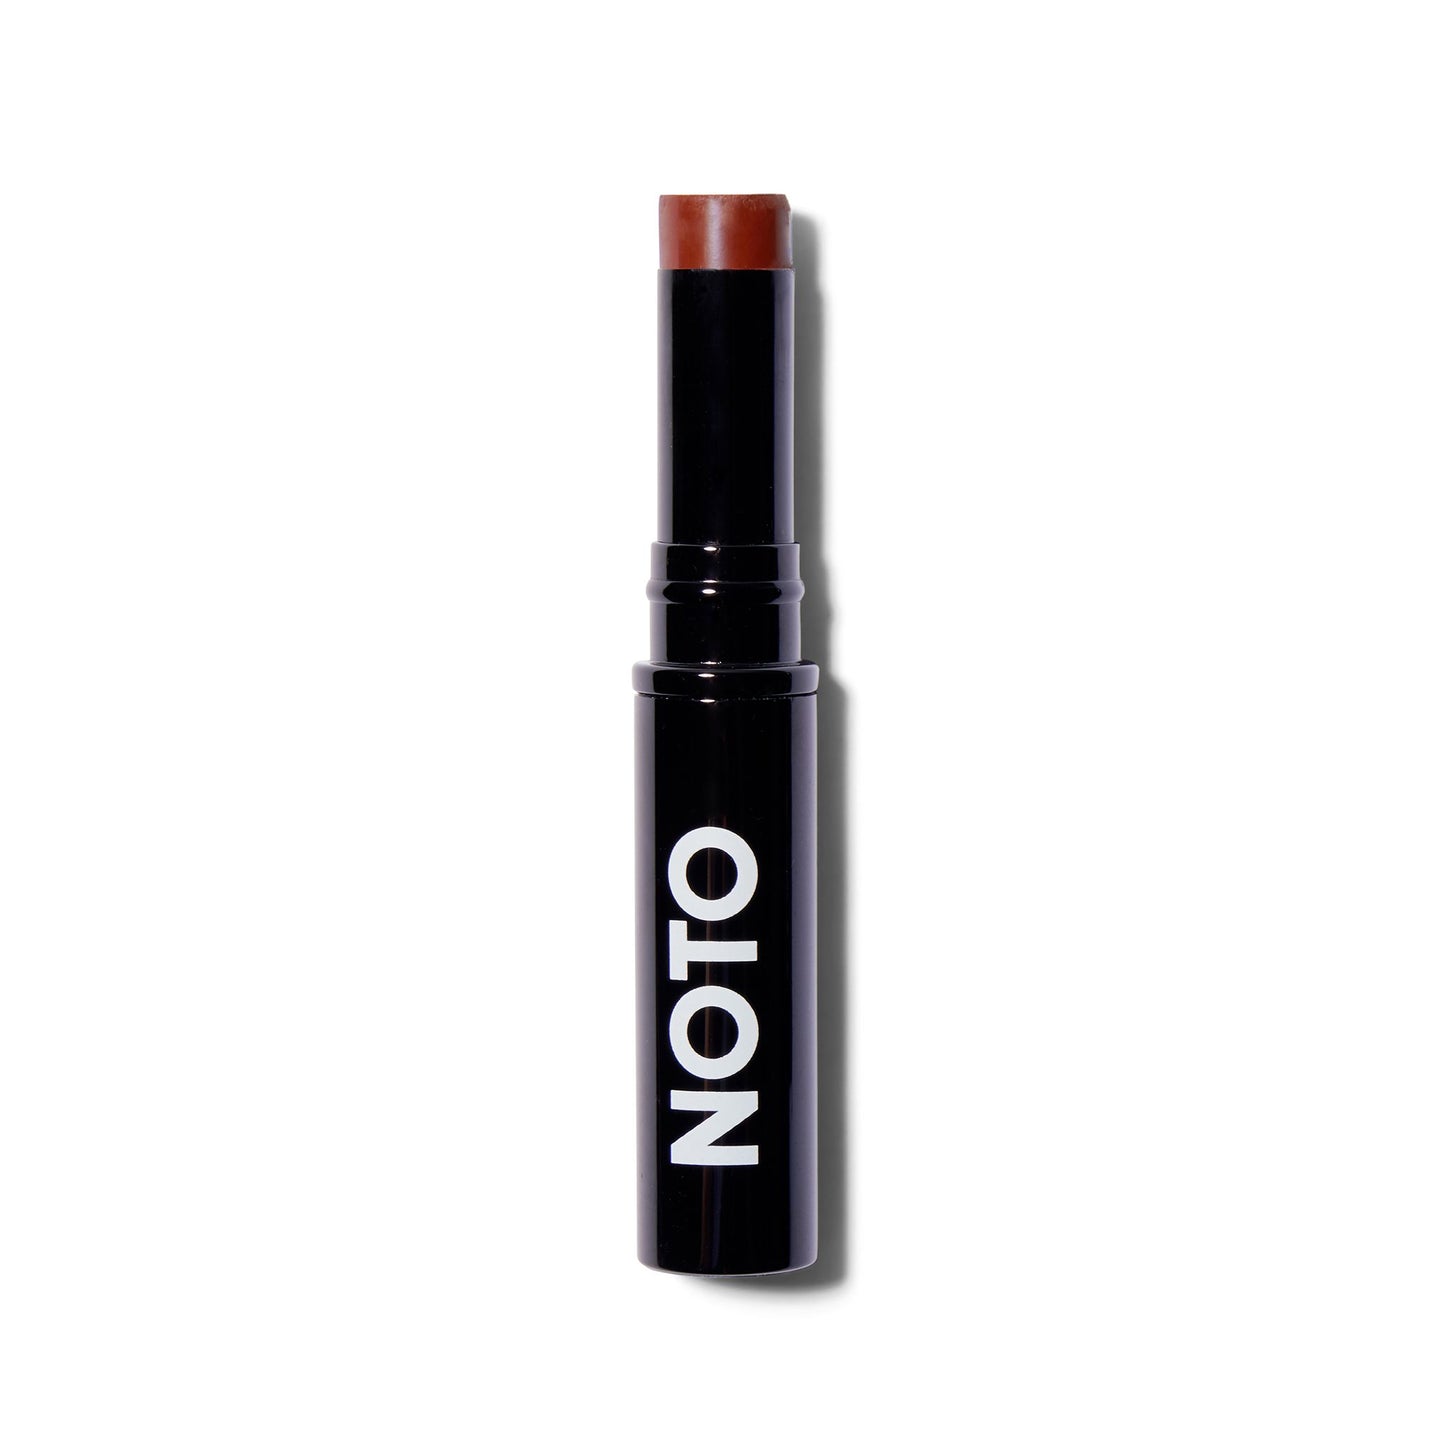 Front view of the Noto Organics Multibenne Stick in Fluxus, a warm russet shade. The cream blush is wound up out of the component so you can see that product. The component is black with a white logo. 